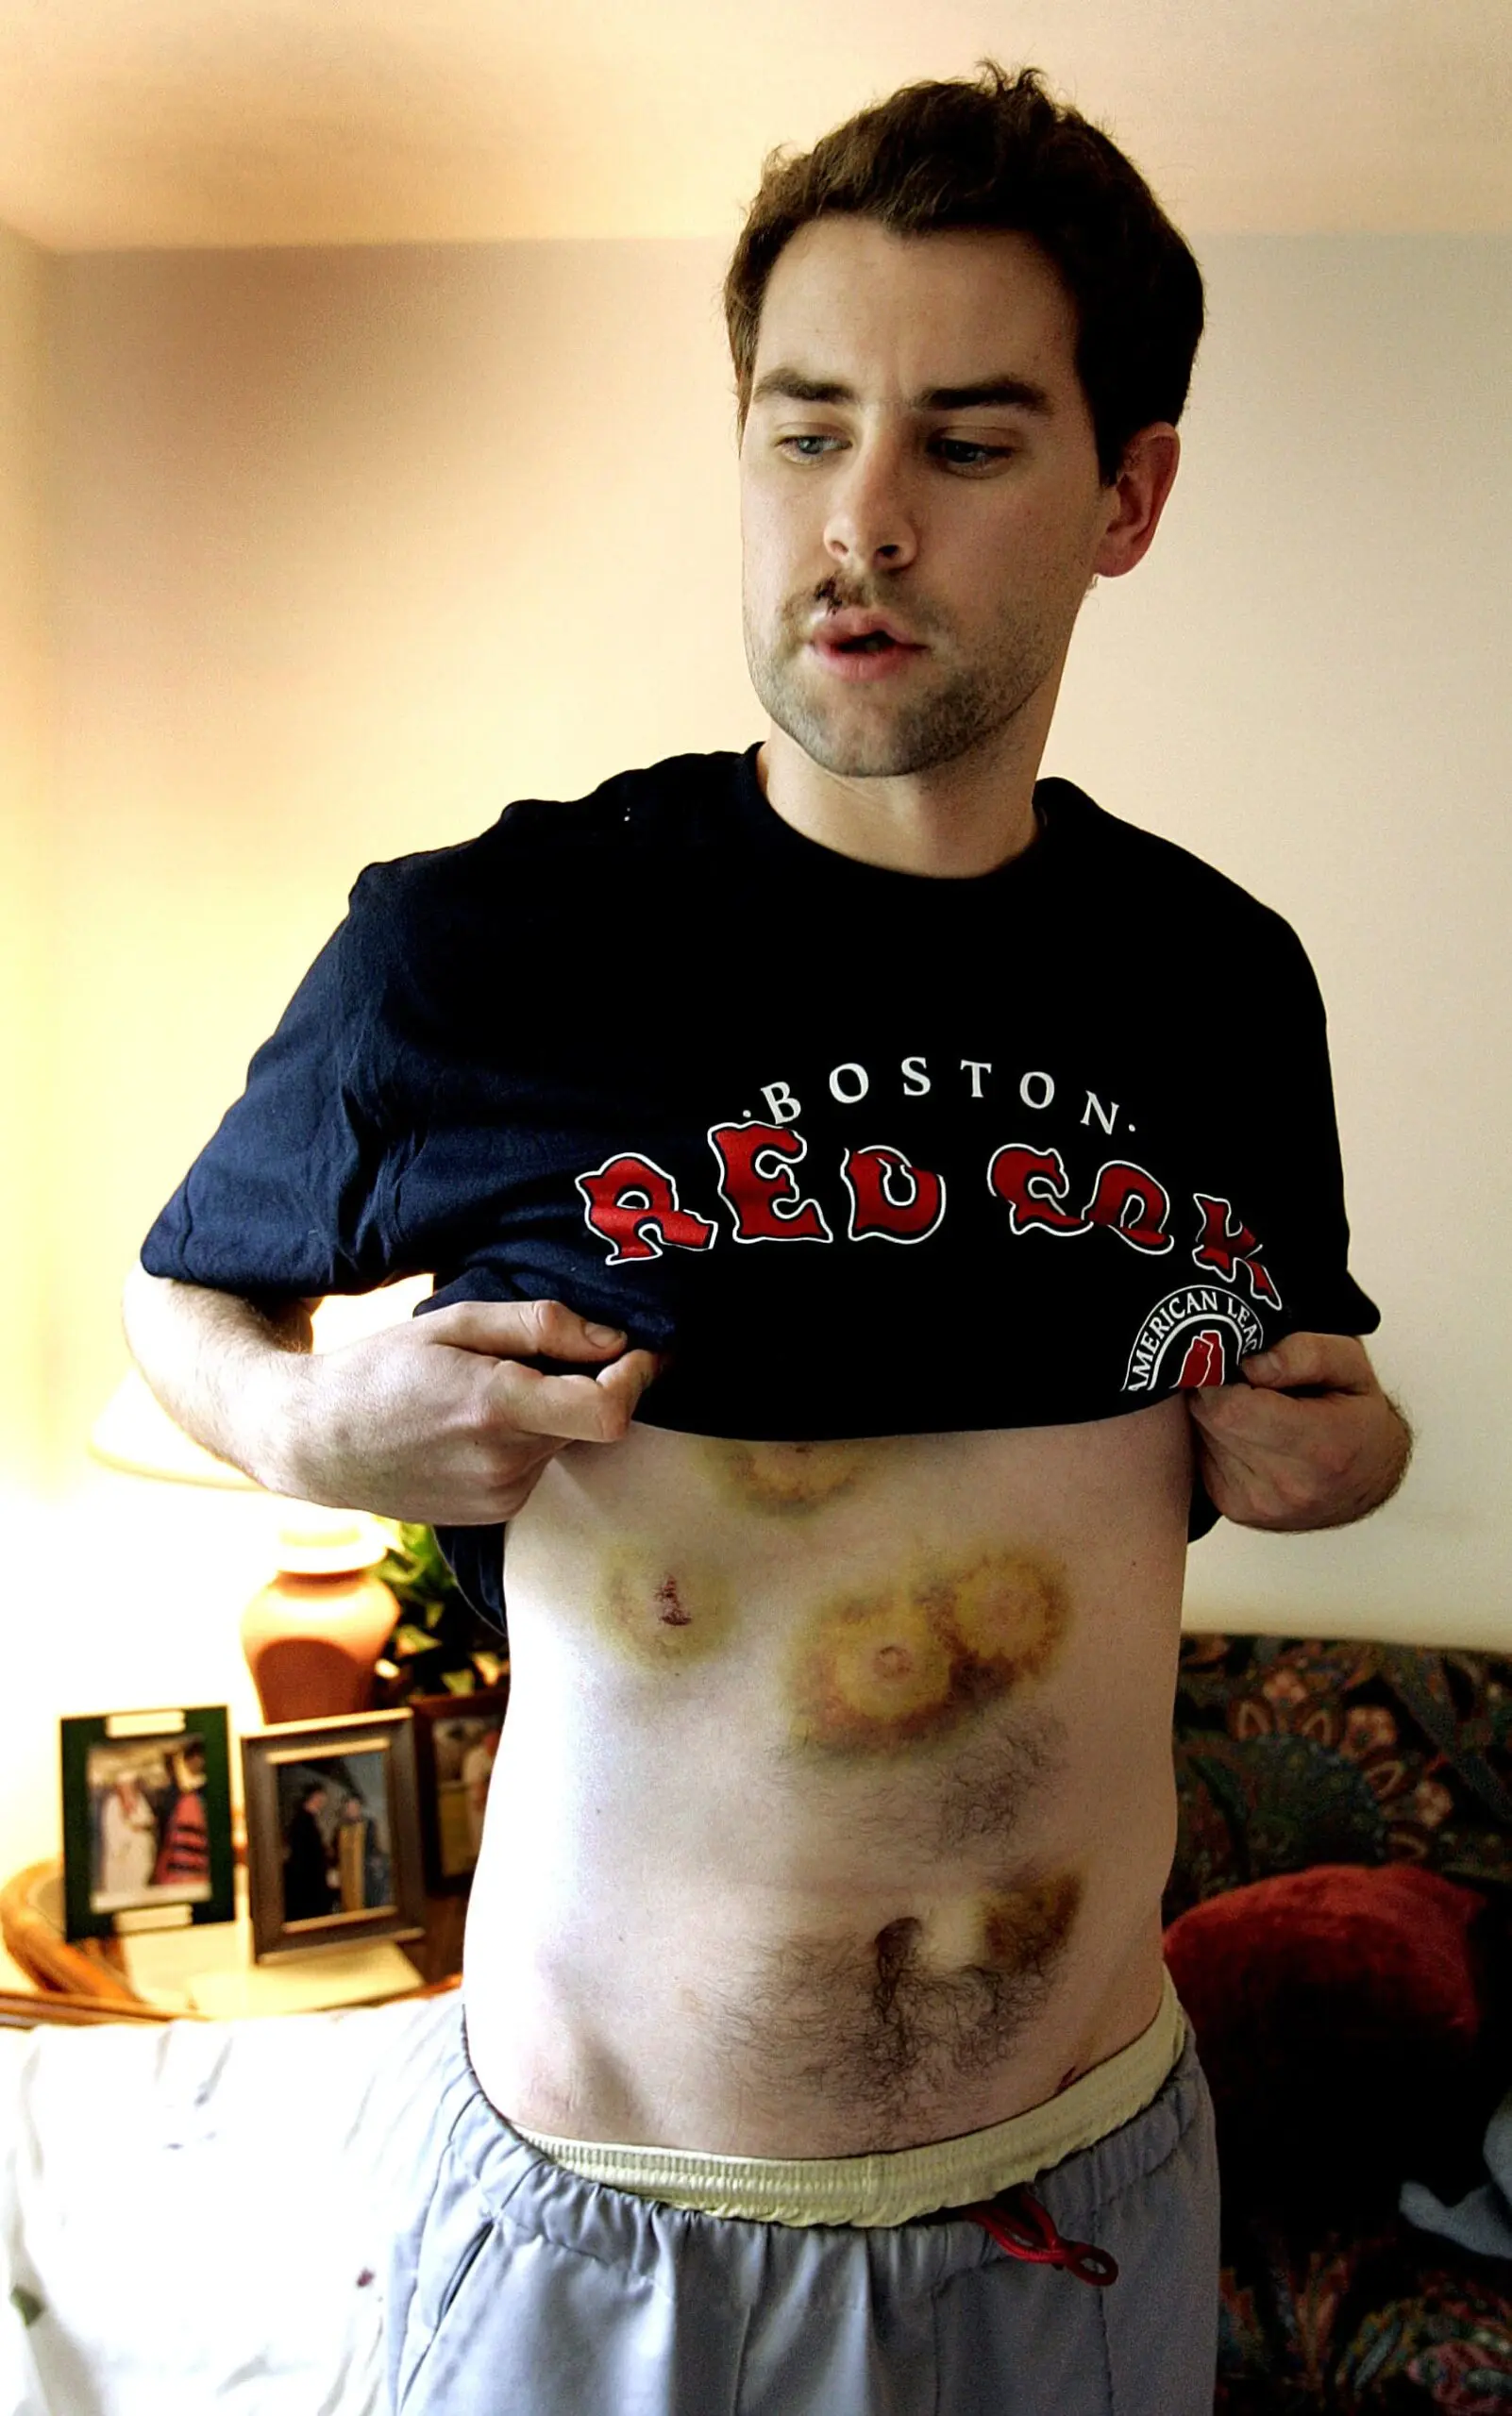 Paul Gately displays some of the wounds he sustained from Boston police firing pepper balls.